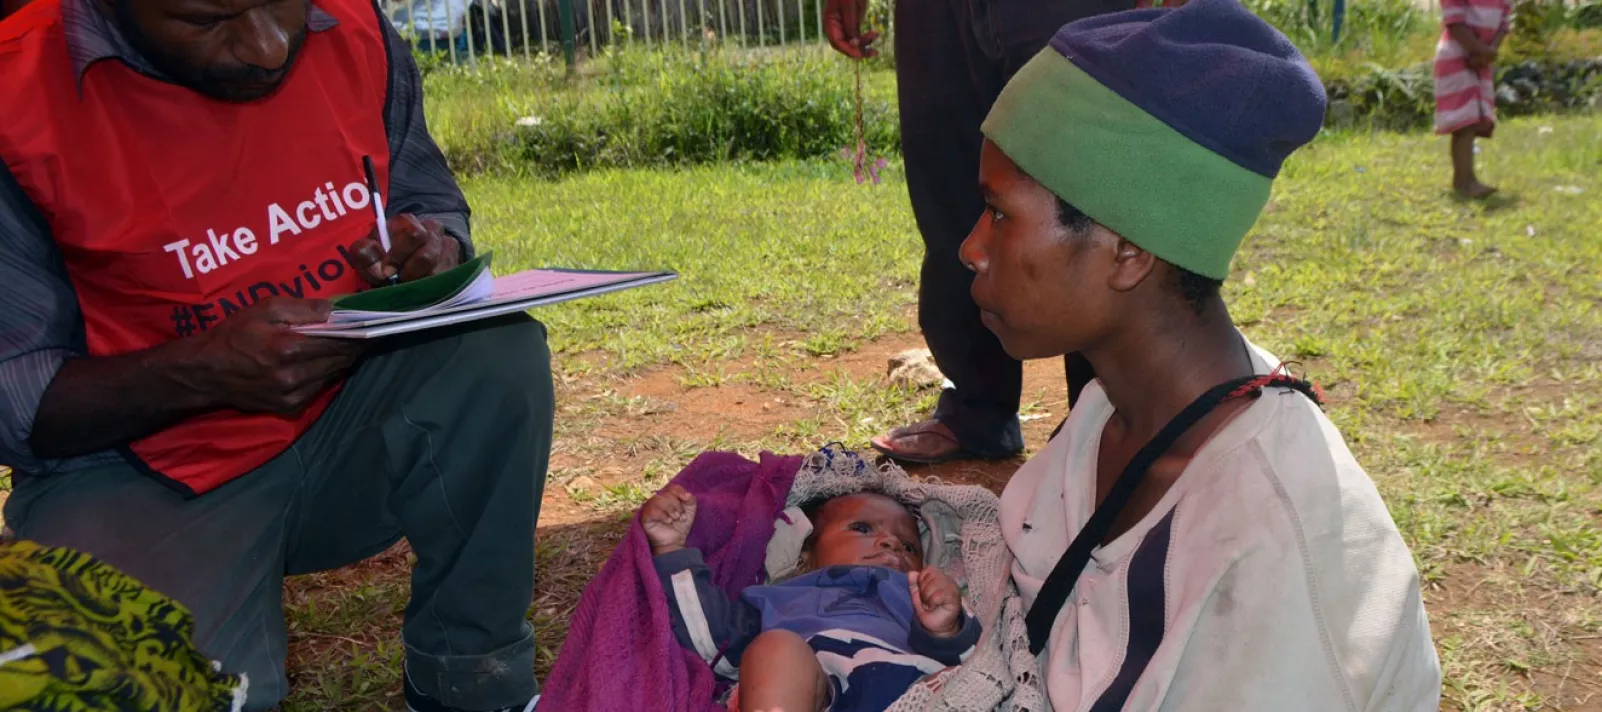 Angela and her son get attended to by a health worker at a child health outreach site.